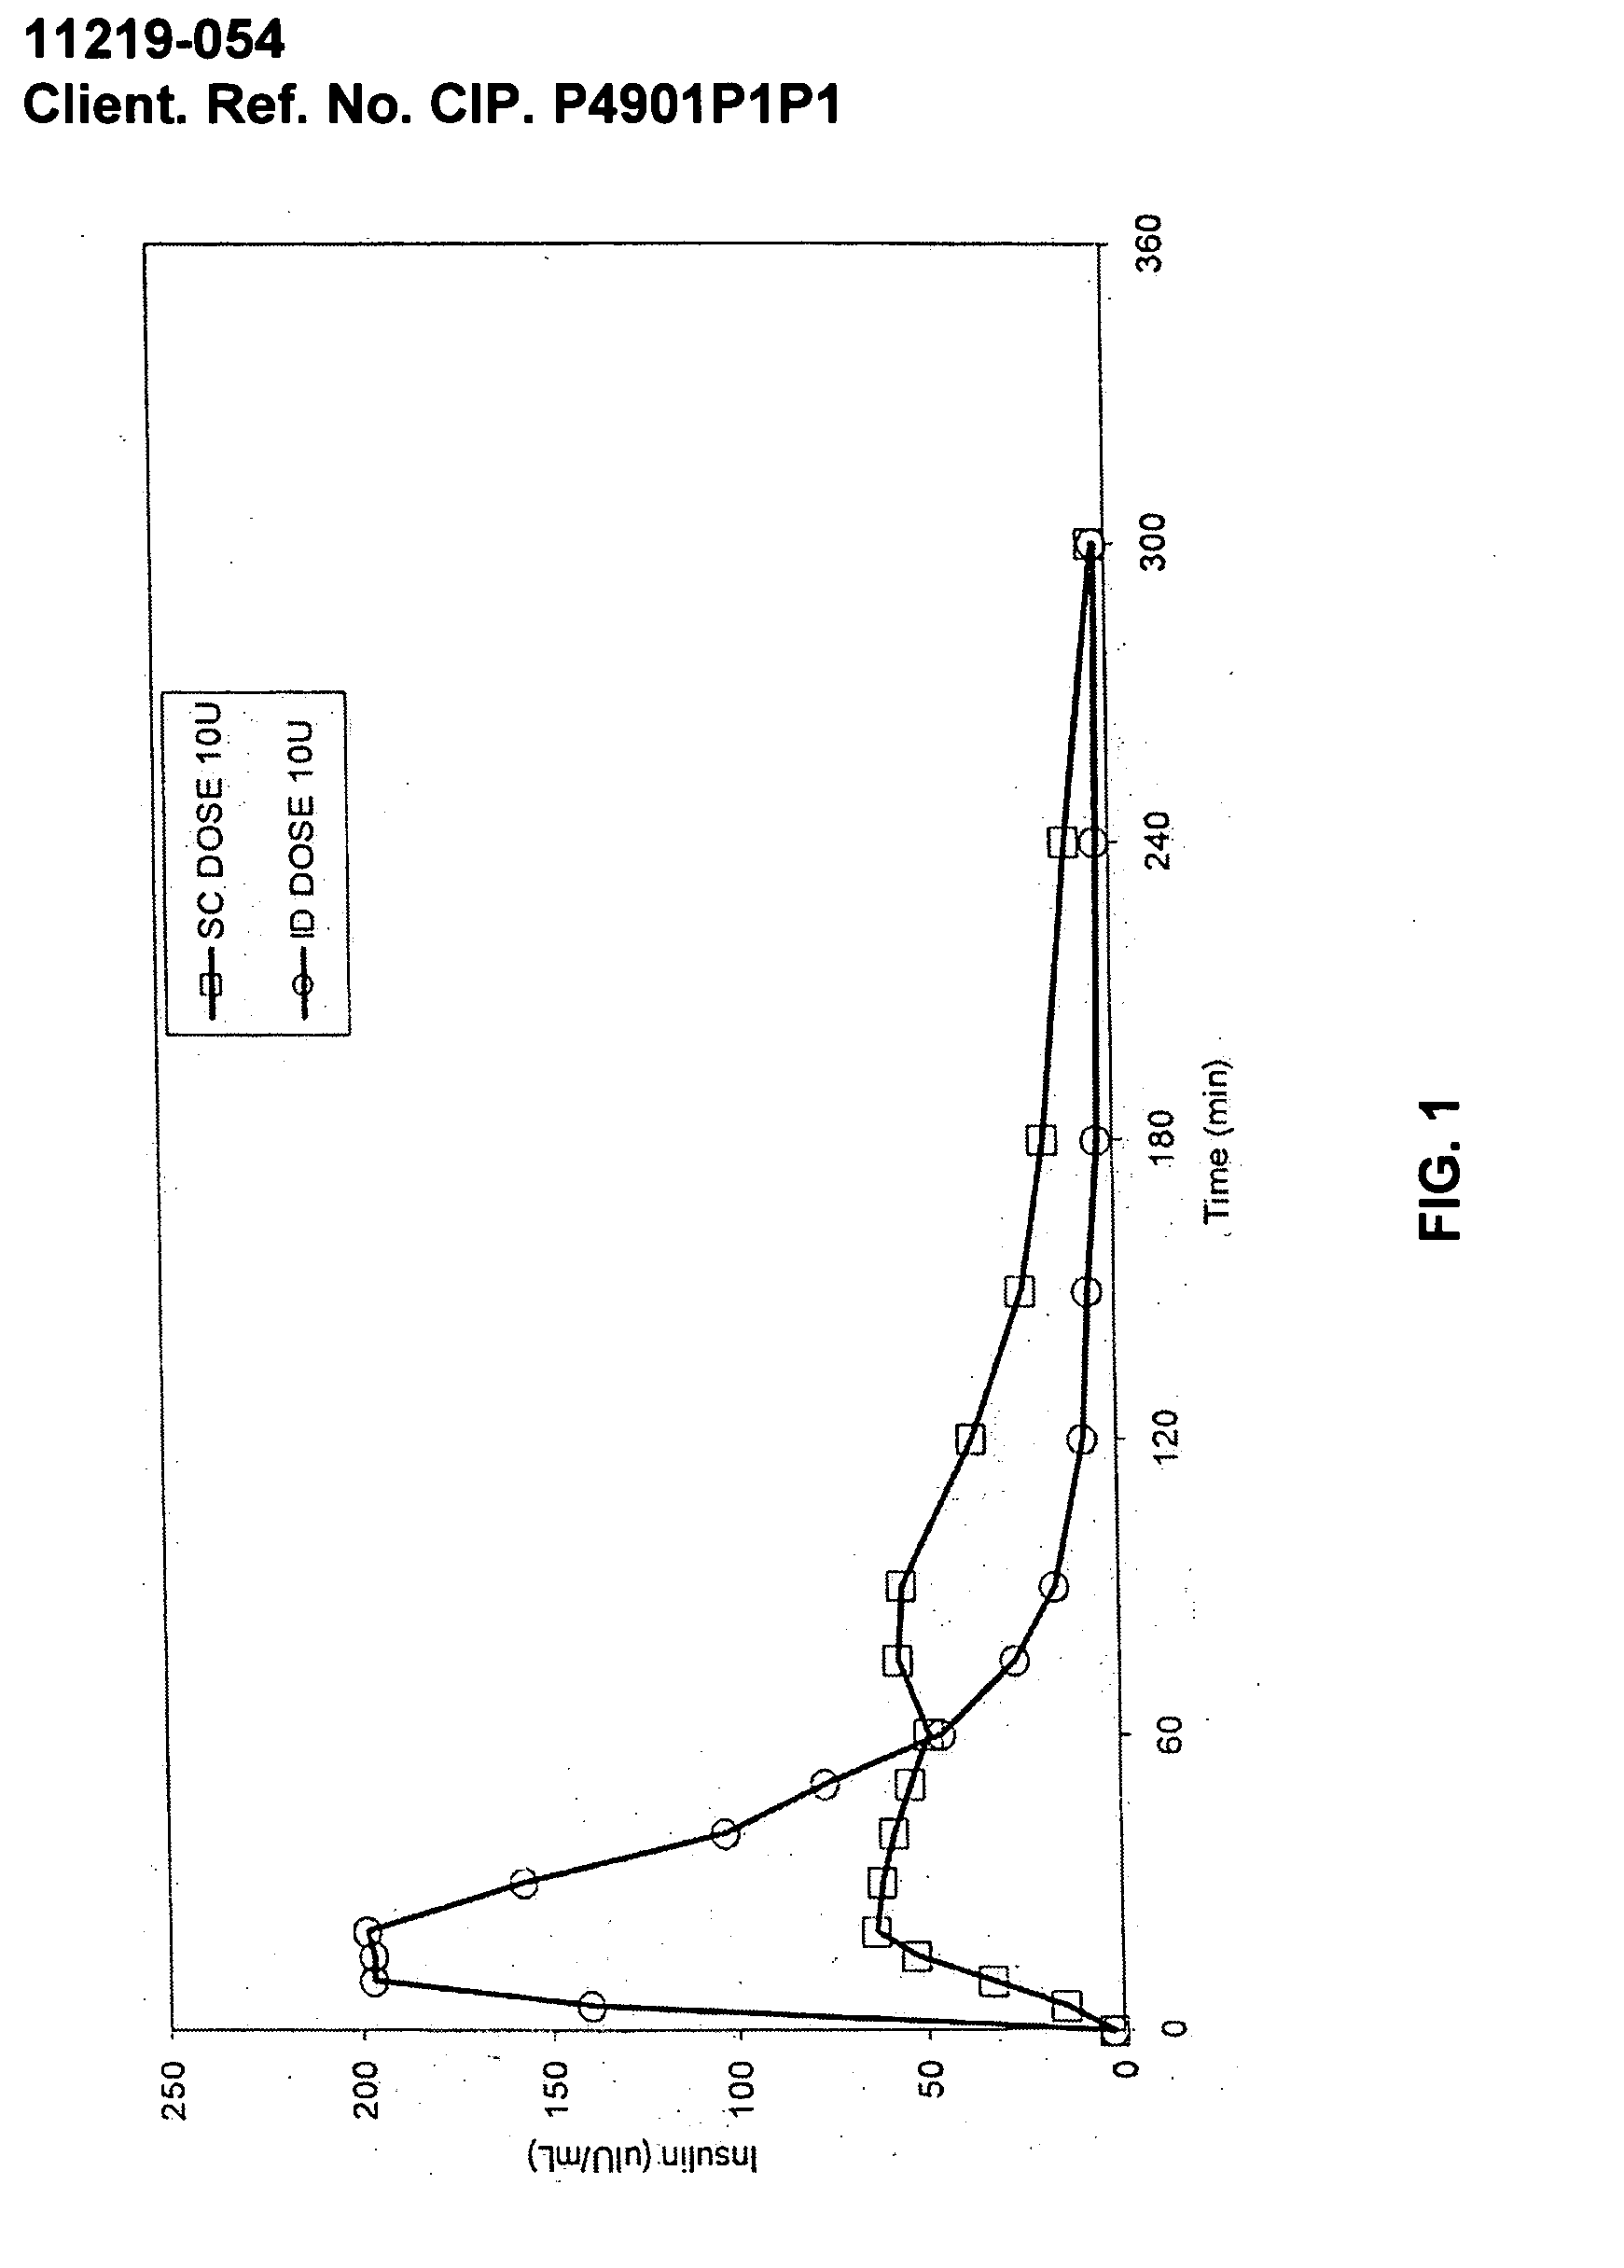 Method for delivering interferons to the intradermal compartment